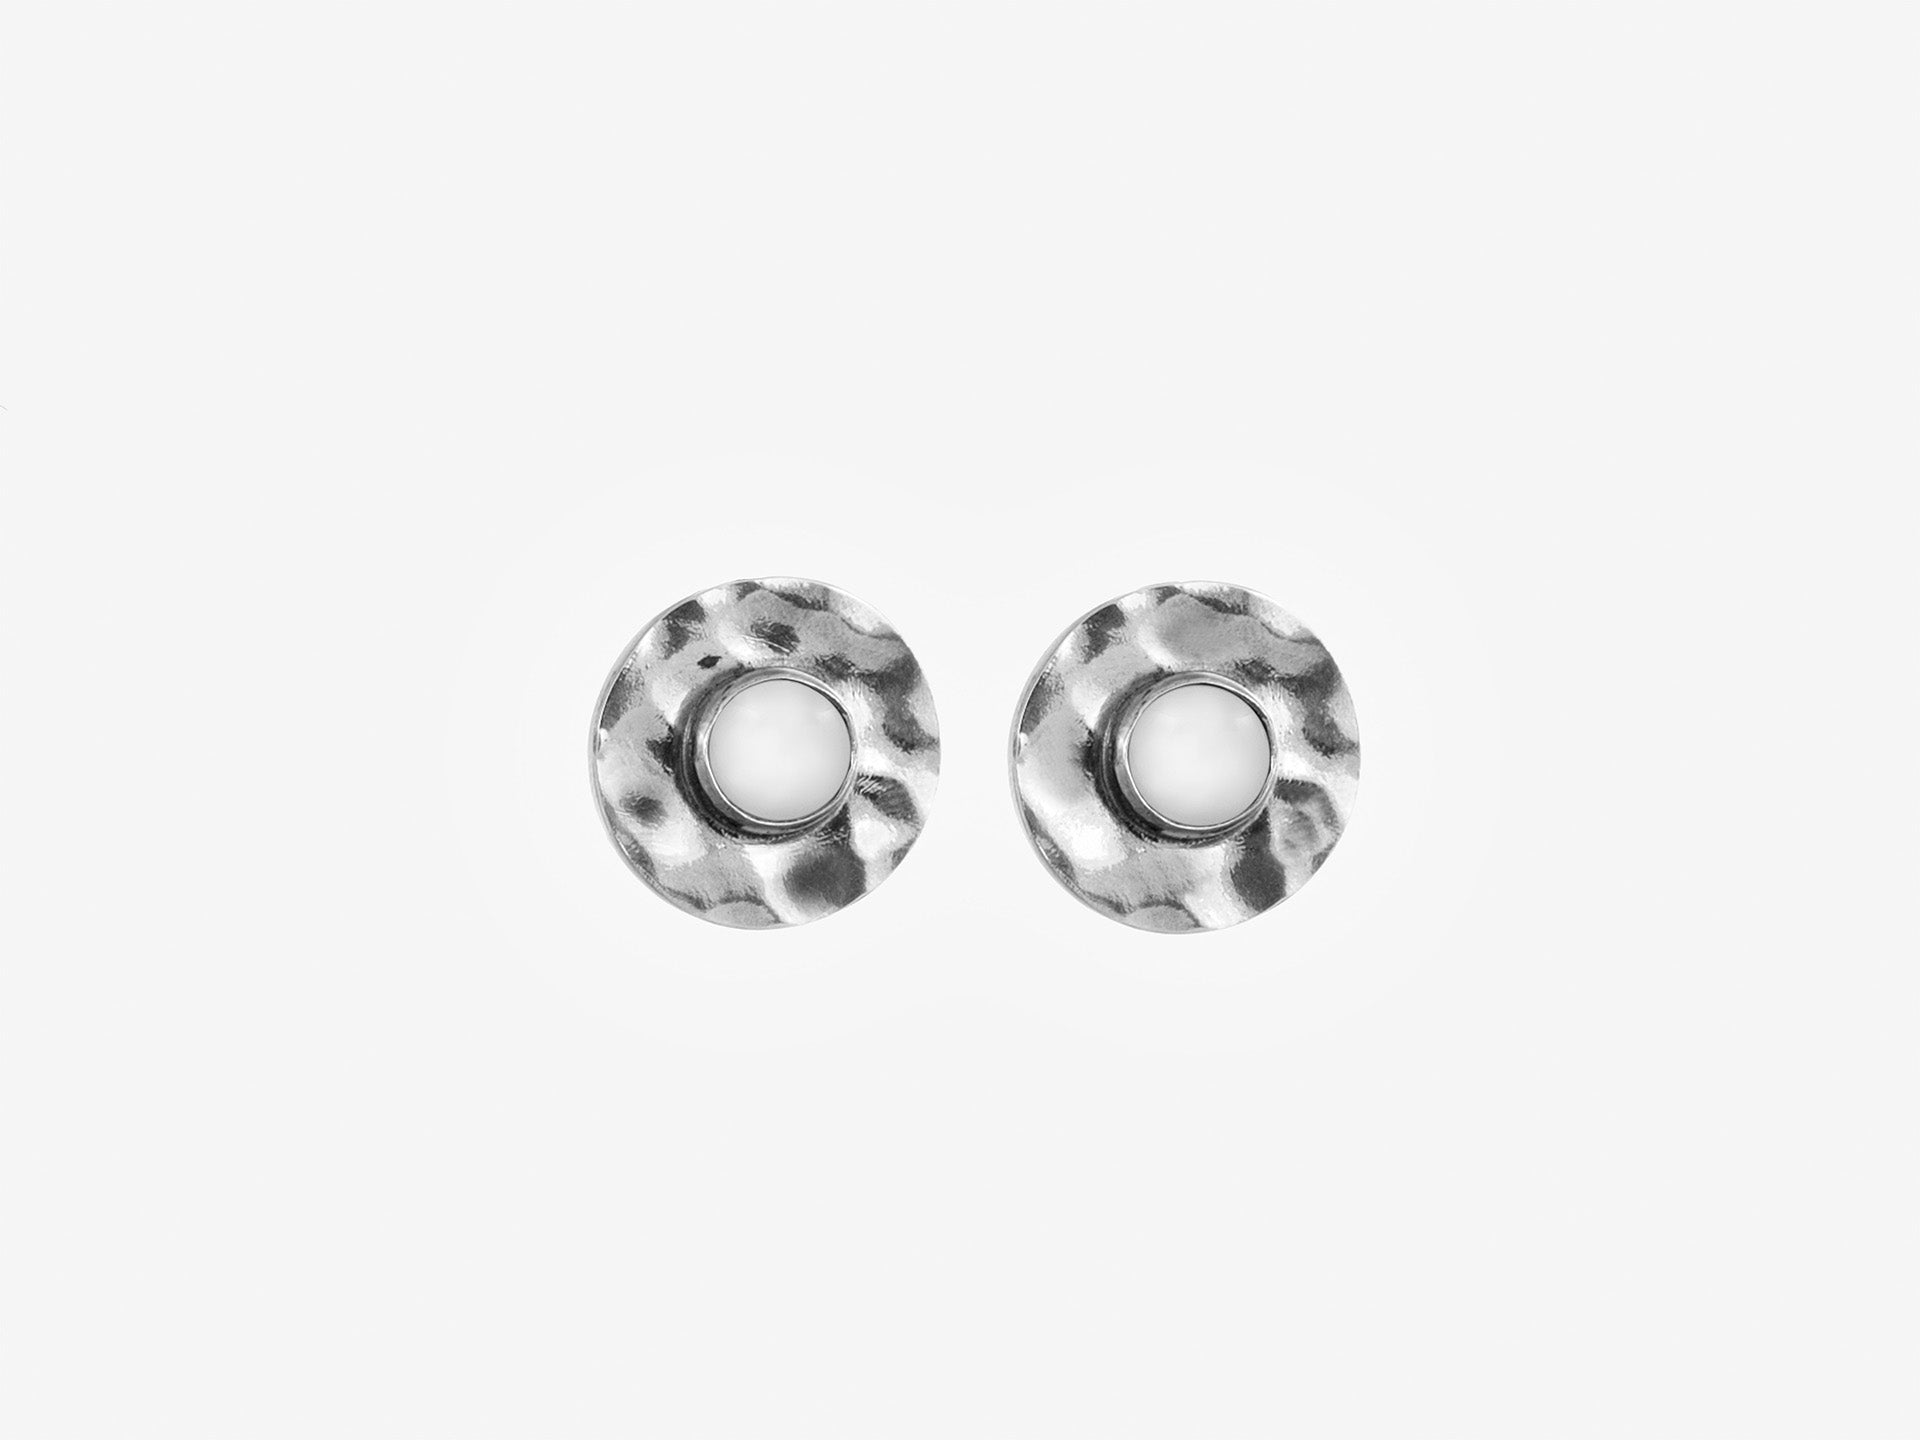 Olimpia, earrings in glass and silver, round shaped